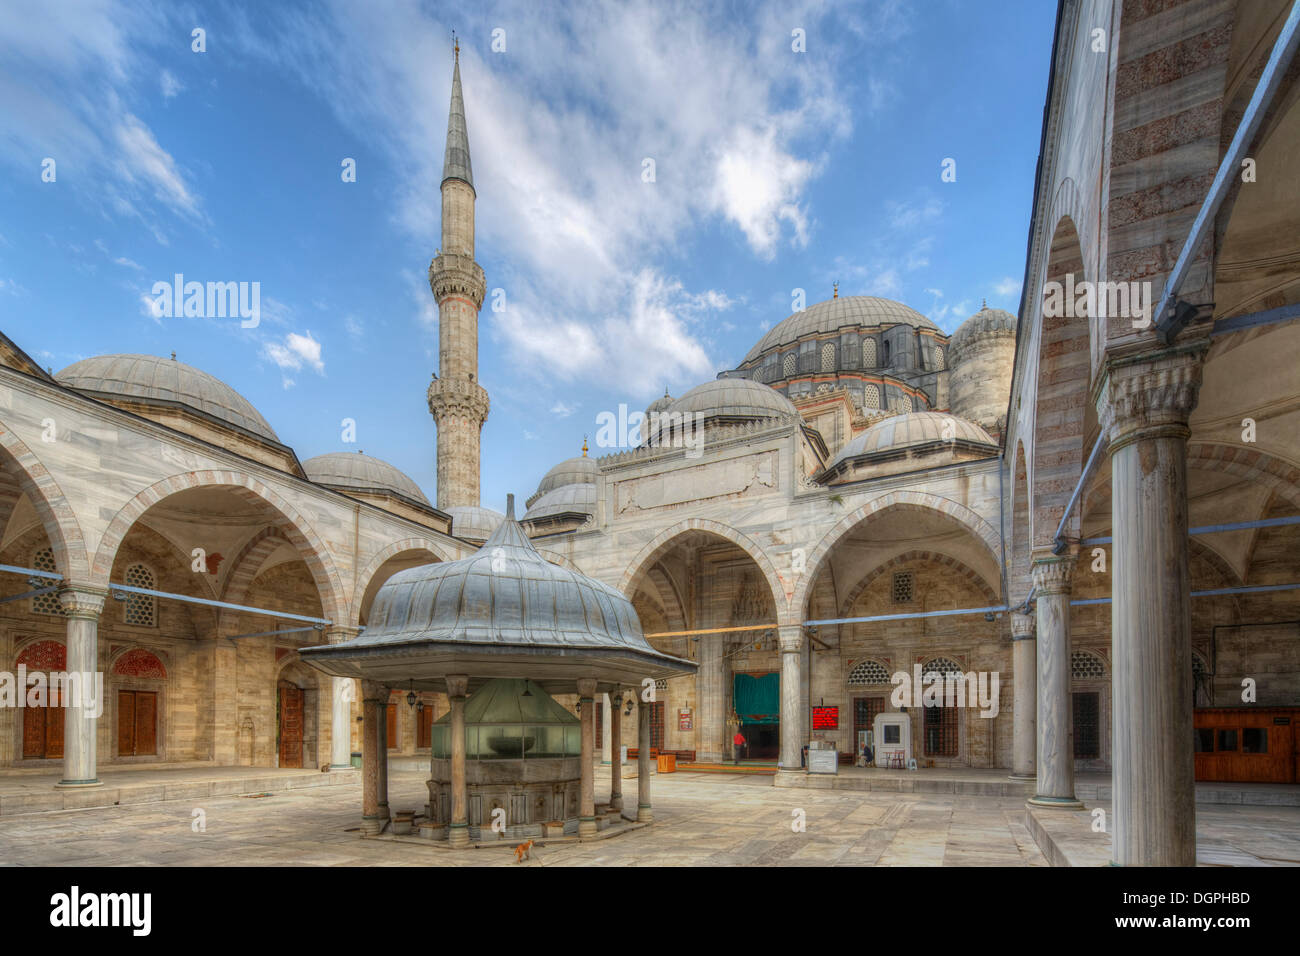 Atrium, Sehzade Mosque, Prince's Mosque, built by Mimar Sinan, Sehzade or Saraçhane in the Fatih district, Fatih, Istanbul Stock Photo